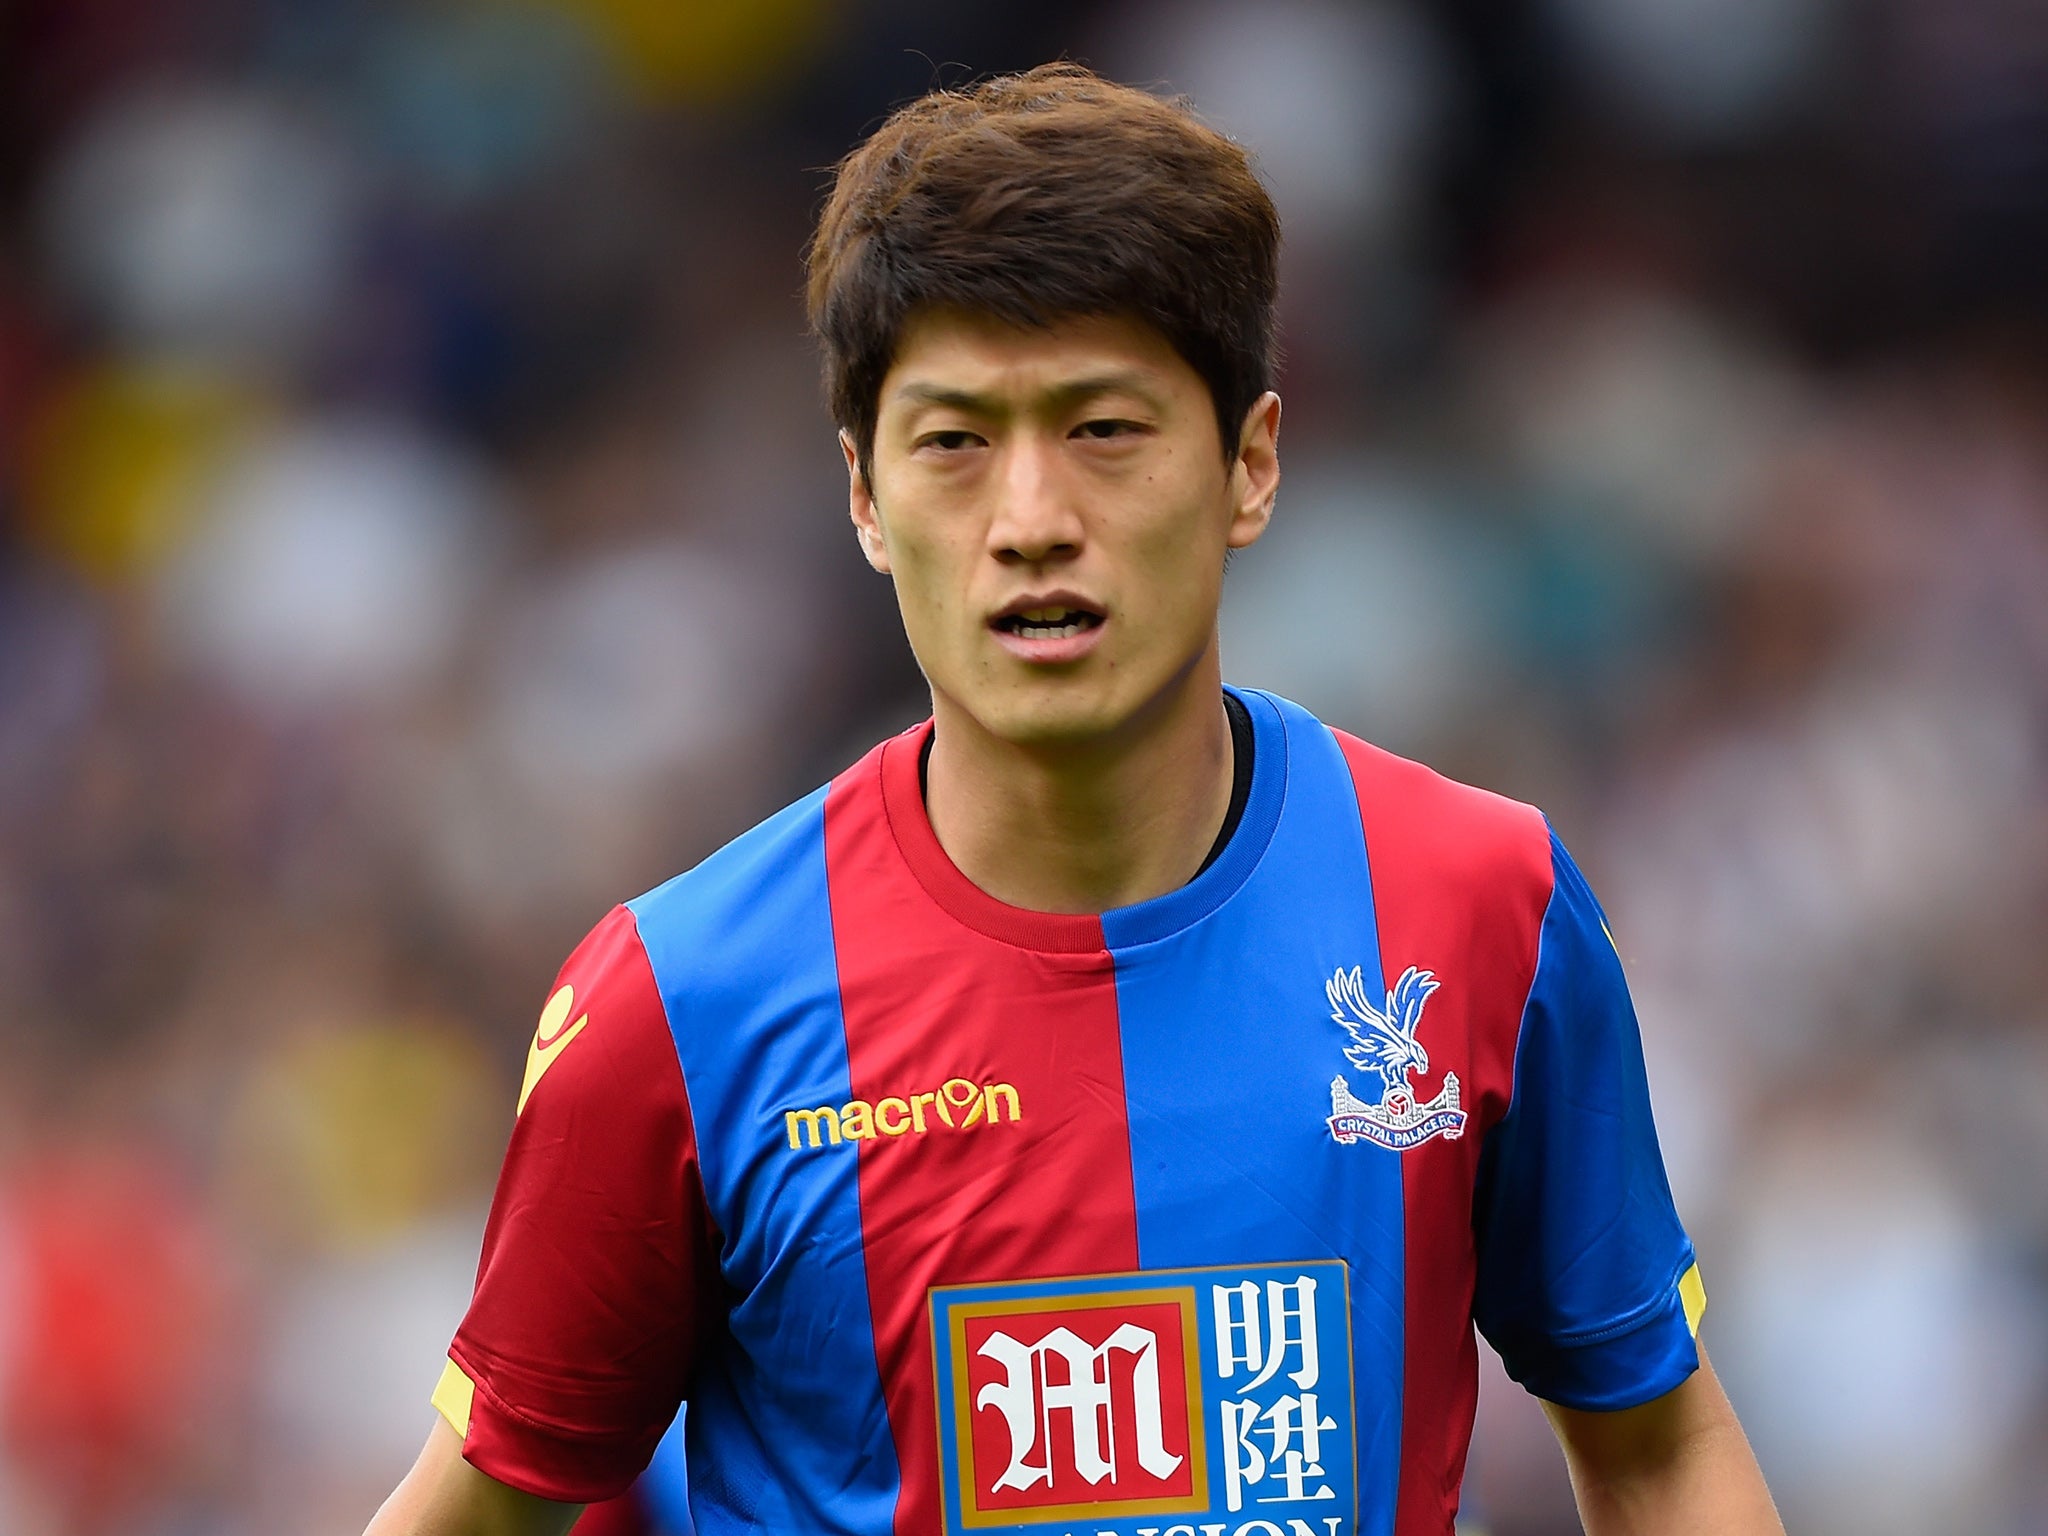 Lee joined Palace from Bolton Wanderers in February 2015